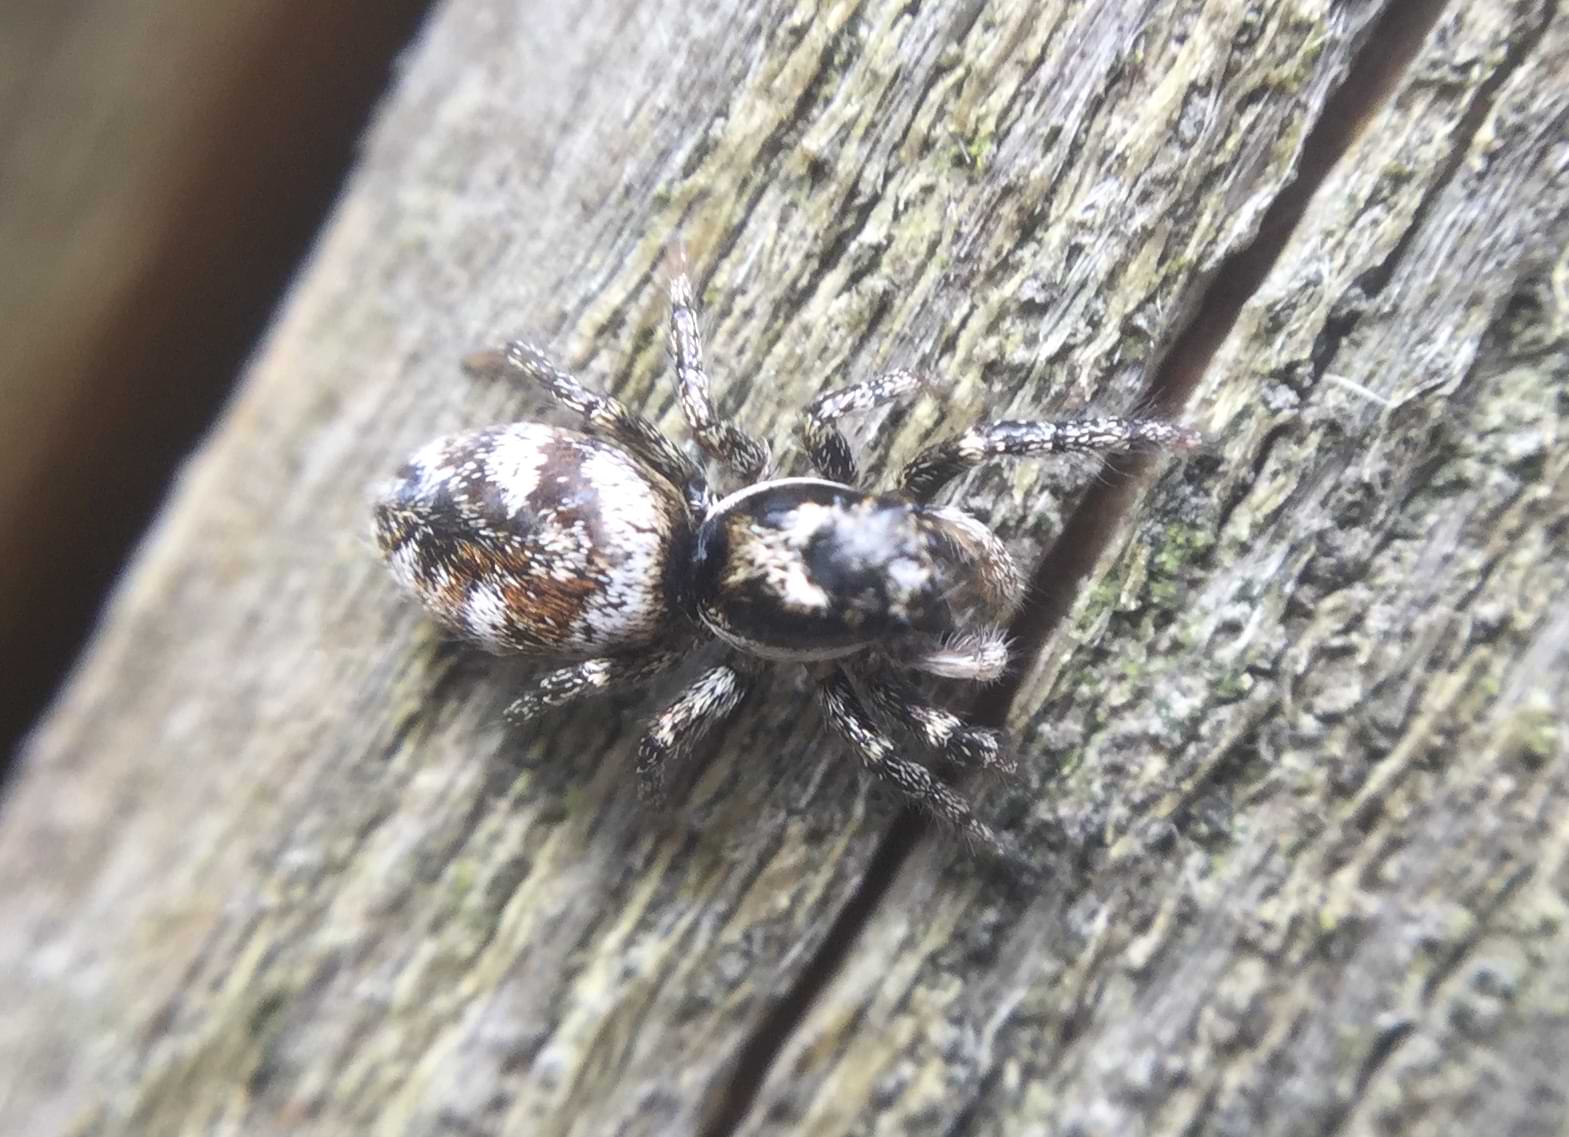 Top-down photo of the same spider. Its abdomen has small patches of orange and brown hairs mixed in with the black and white.